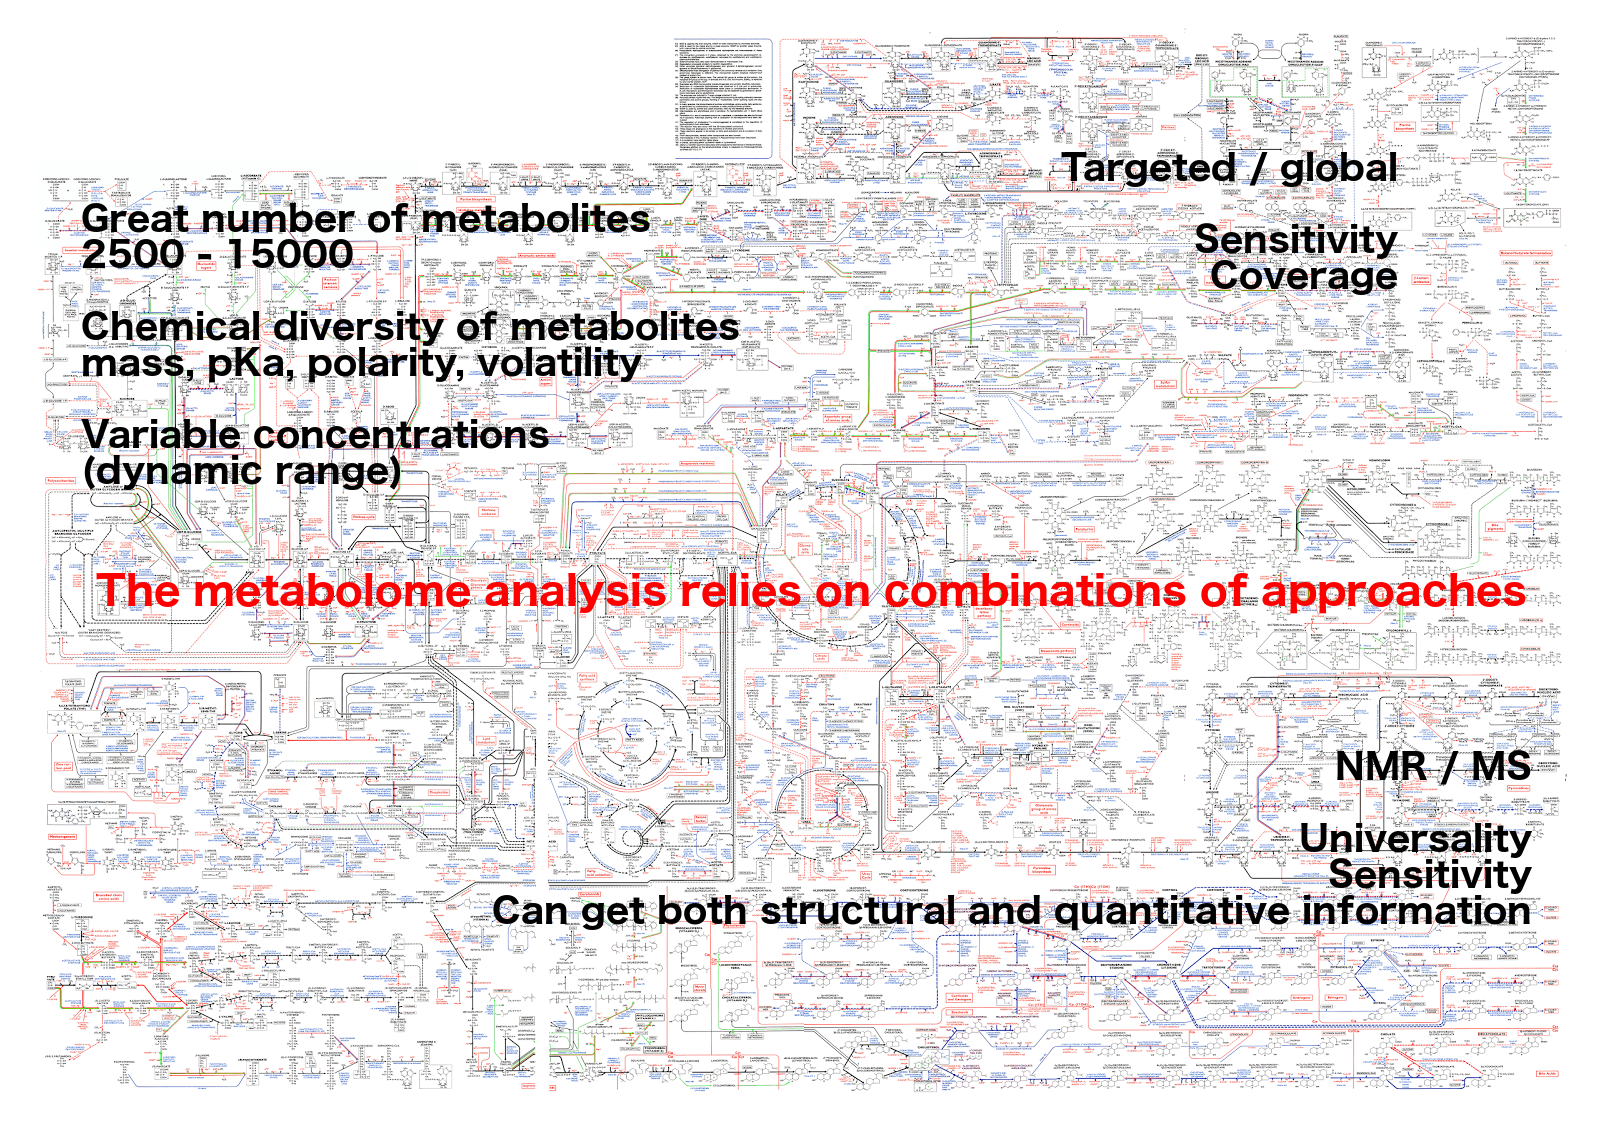 Large pathway map with text over it reading: targeted/global, sensitity coverage. Great number of metabolites, 2.5k to 15k. Chemical diversity of metabolites, mass, pKa, polarity, volatiity. Variable concentrations. NMR vs MS. Universality, Sensitivity, Can get both structural and quantitative information. And in red in the center: The metabolome analysis relies on combinations of approaches.